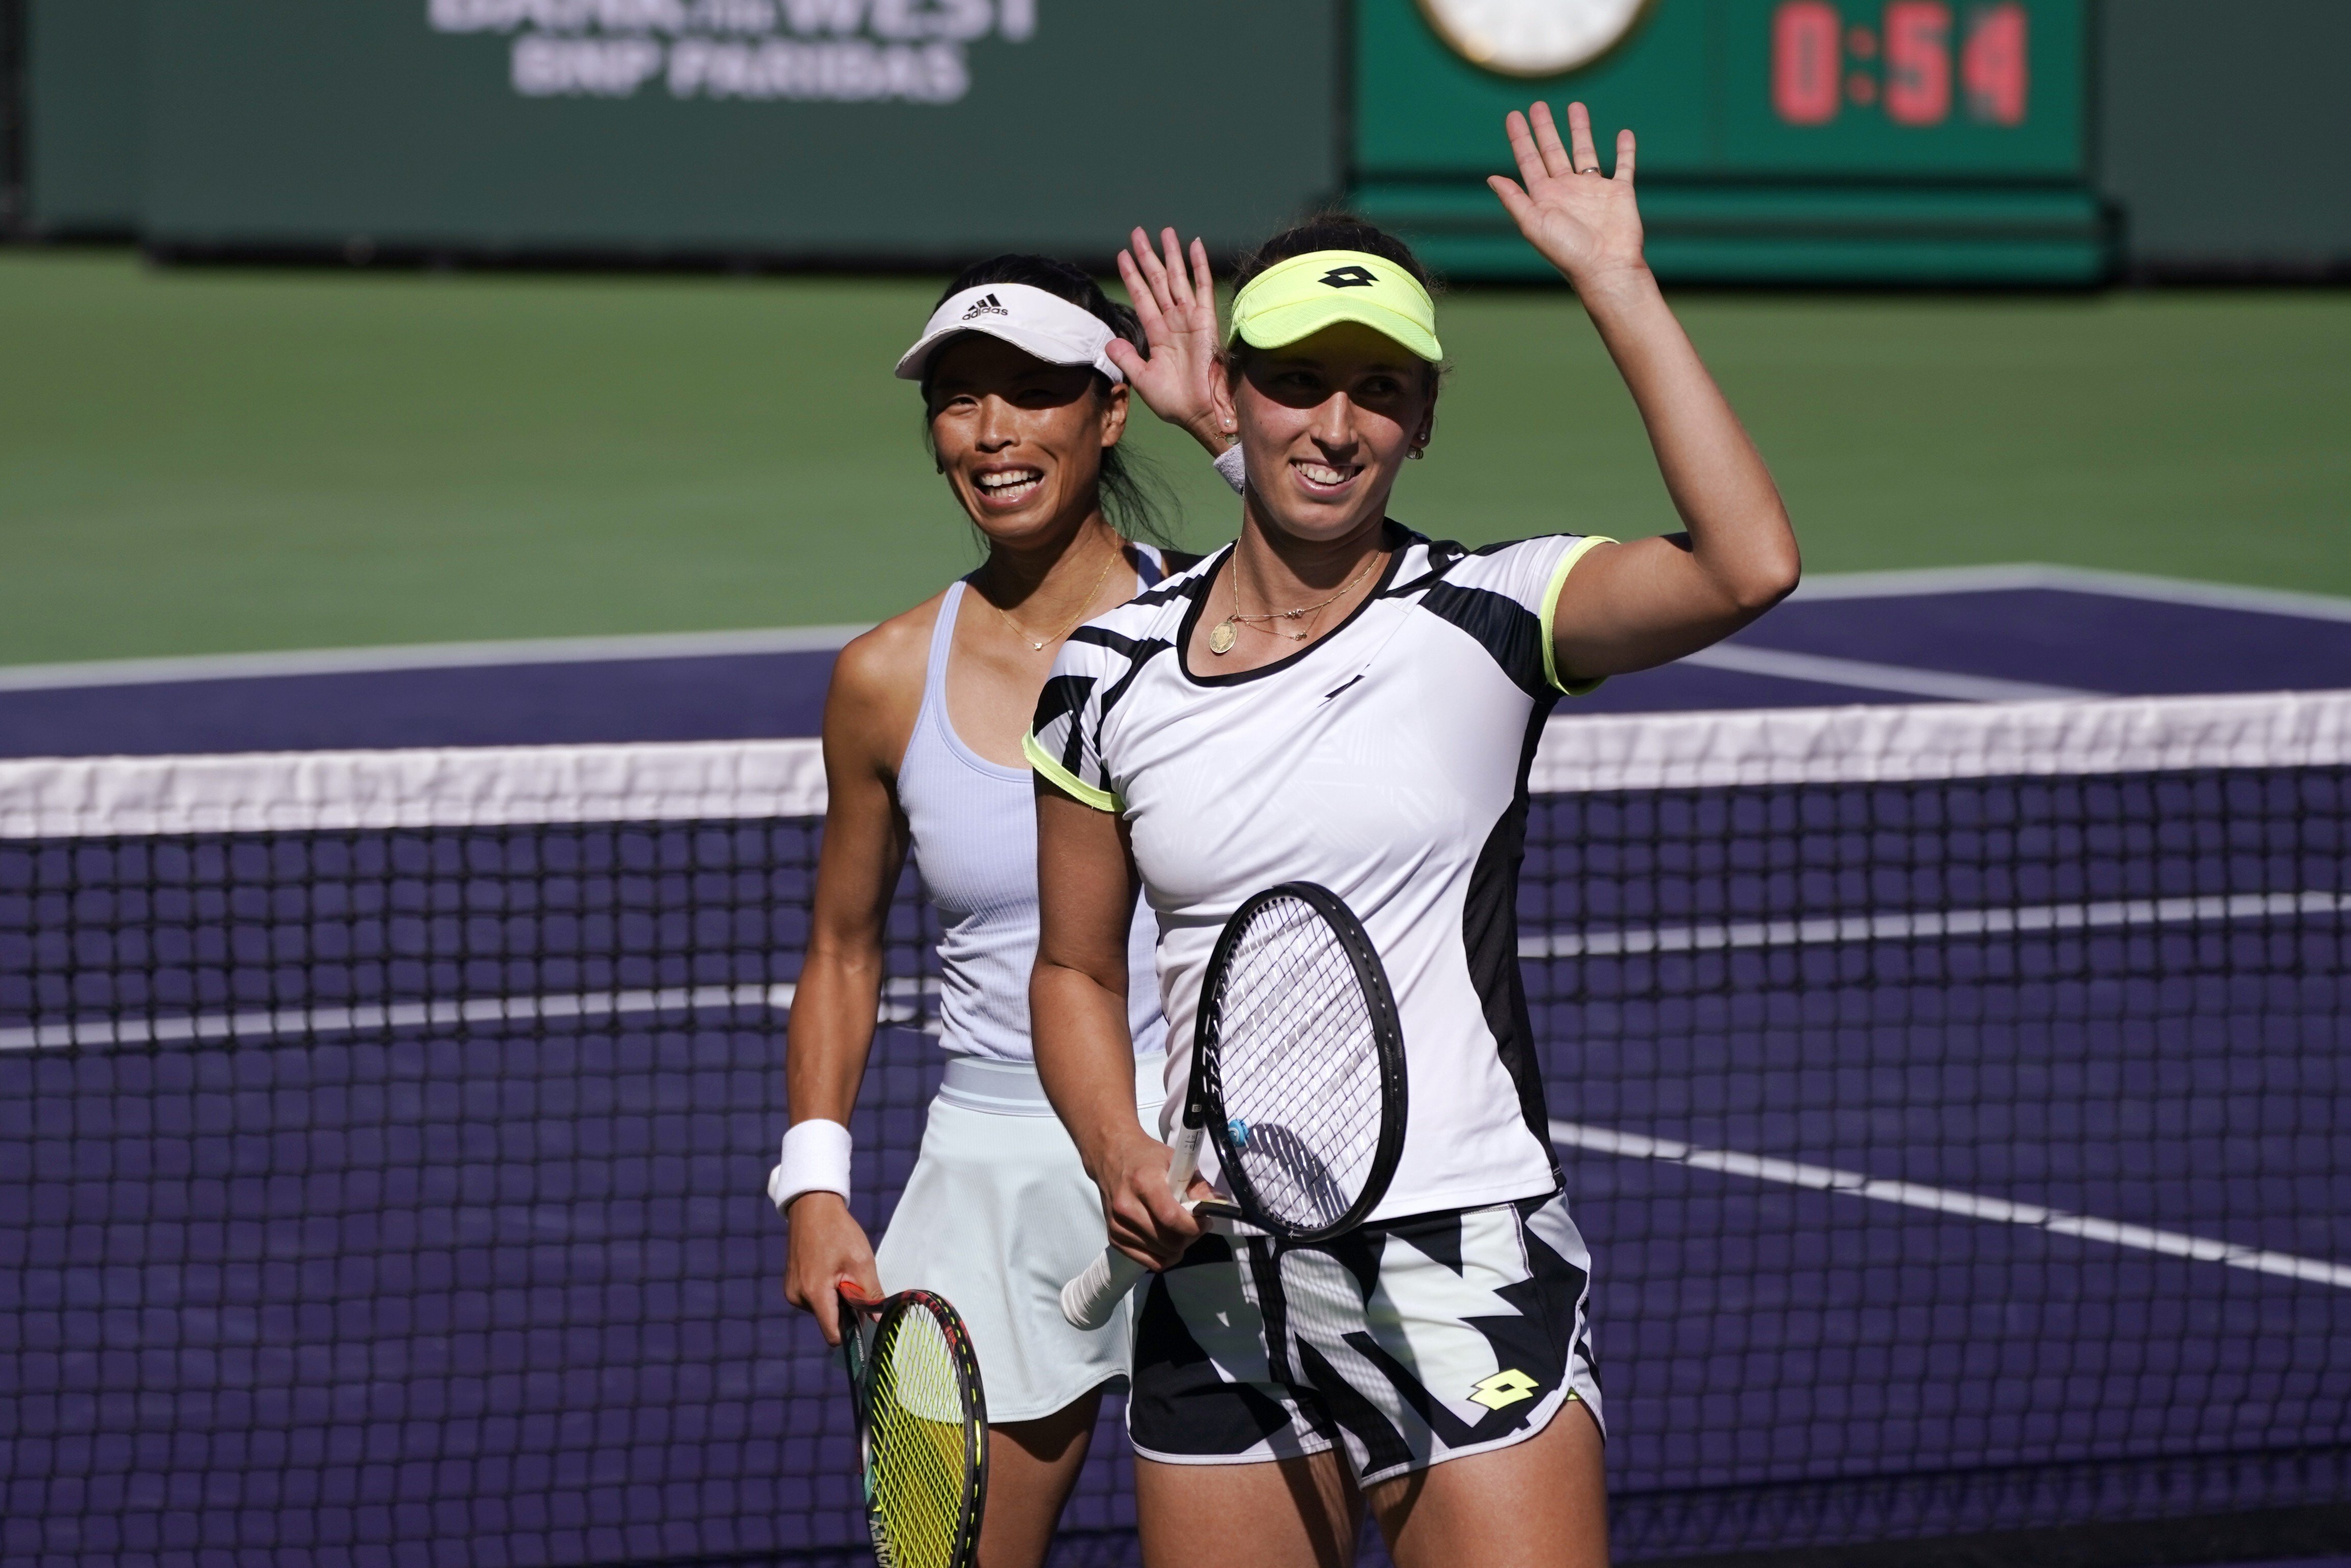 Taiwan’s Hsieh Su-wei and Elise Mertens, of Belgium wave to the crowd after defeating Japan’s Shuko Aoyama and Ena Shibahara in their women’s doubles semi-final at the 2021 BNP Paribas Open at Indian Wells. Photo: AP